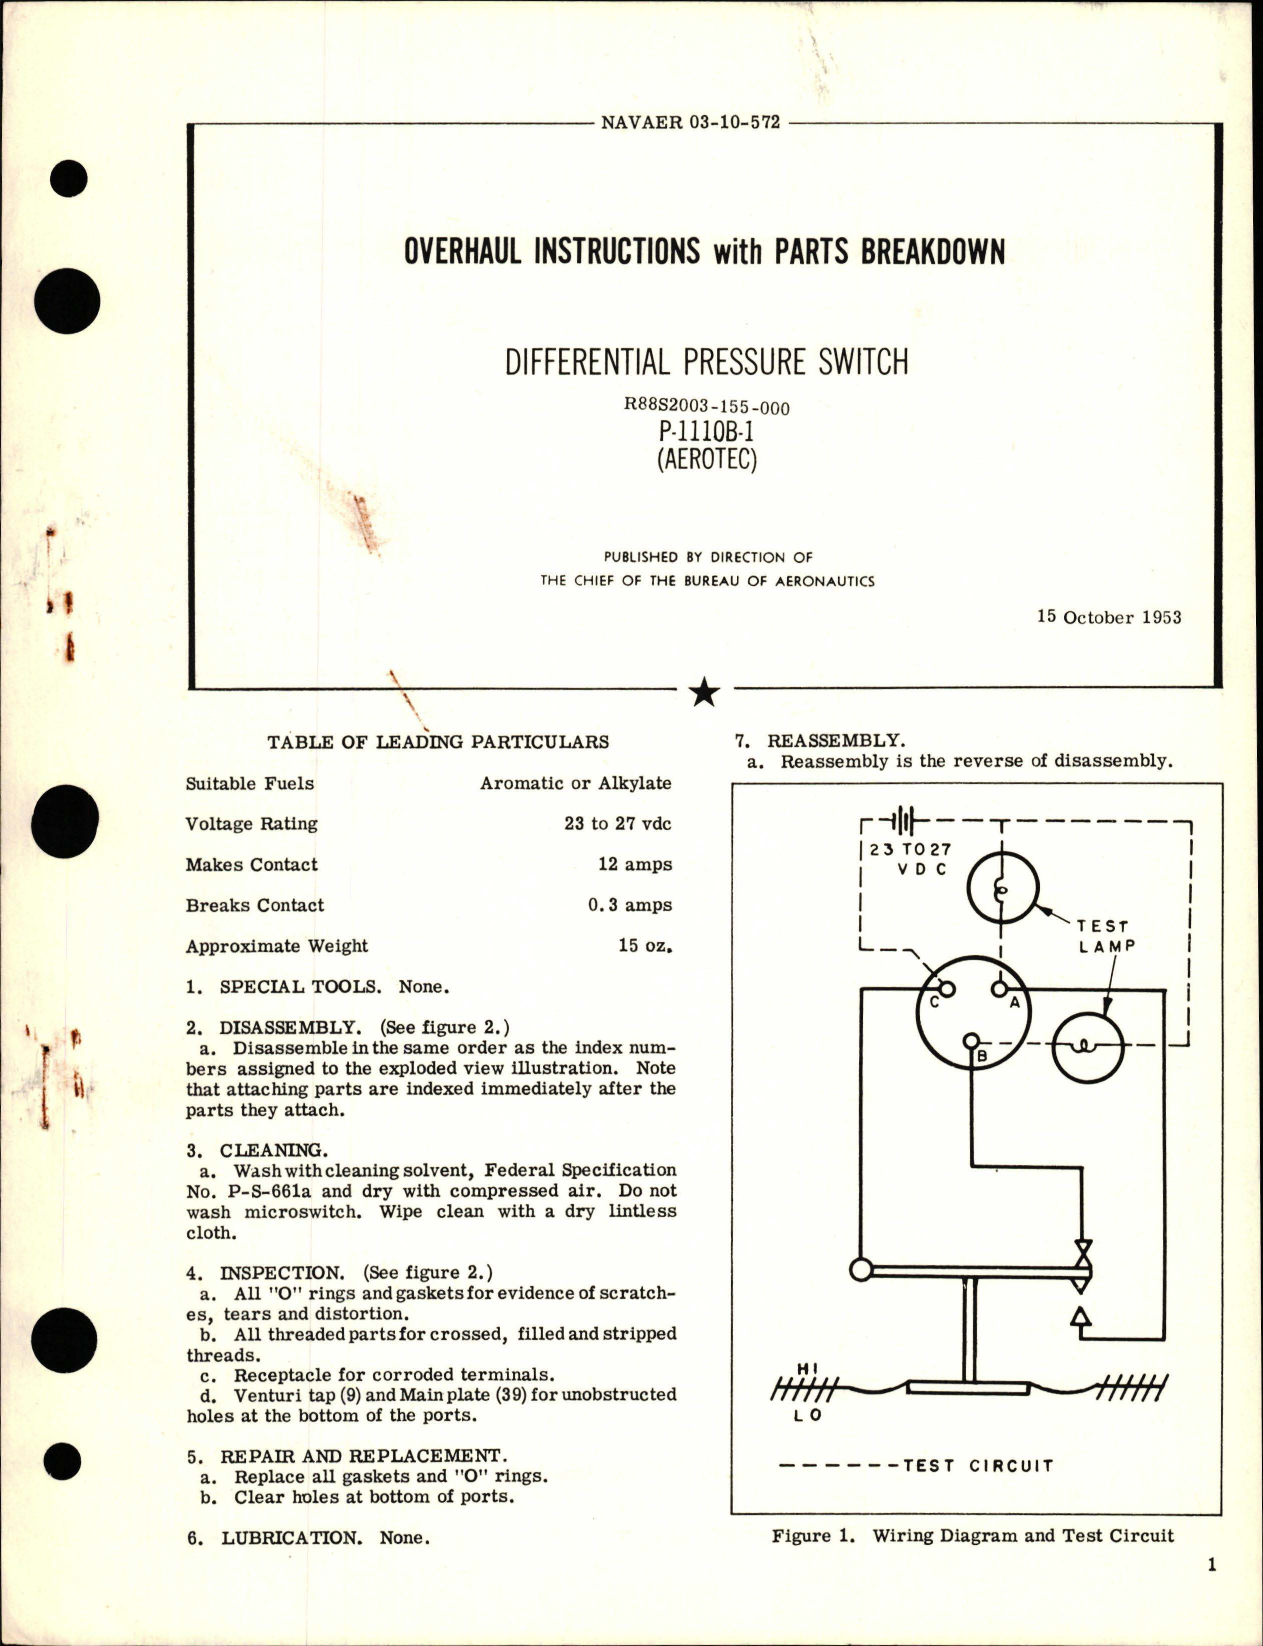 Sample page 1 from AirCorps Library document: Overhaul Instructions with Parts Breakdown for Differential Pressure Switch - P-1110B-1